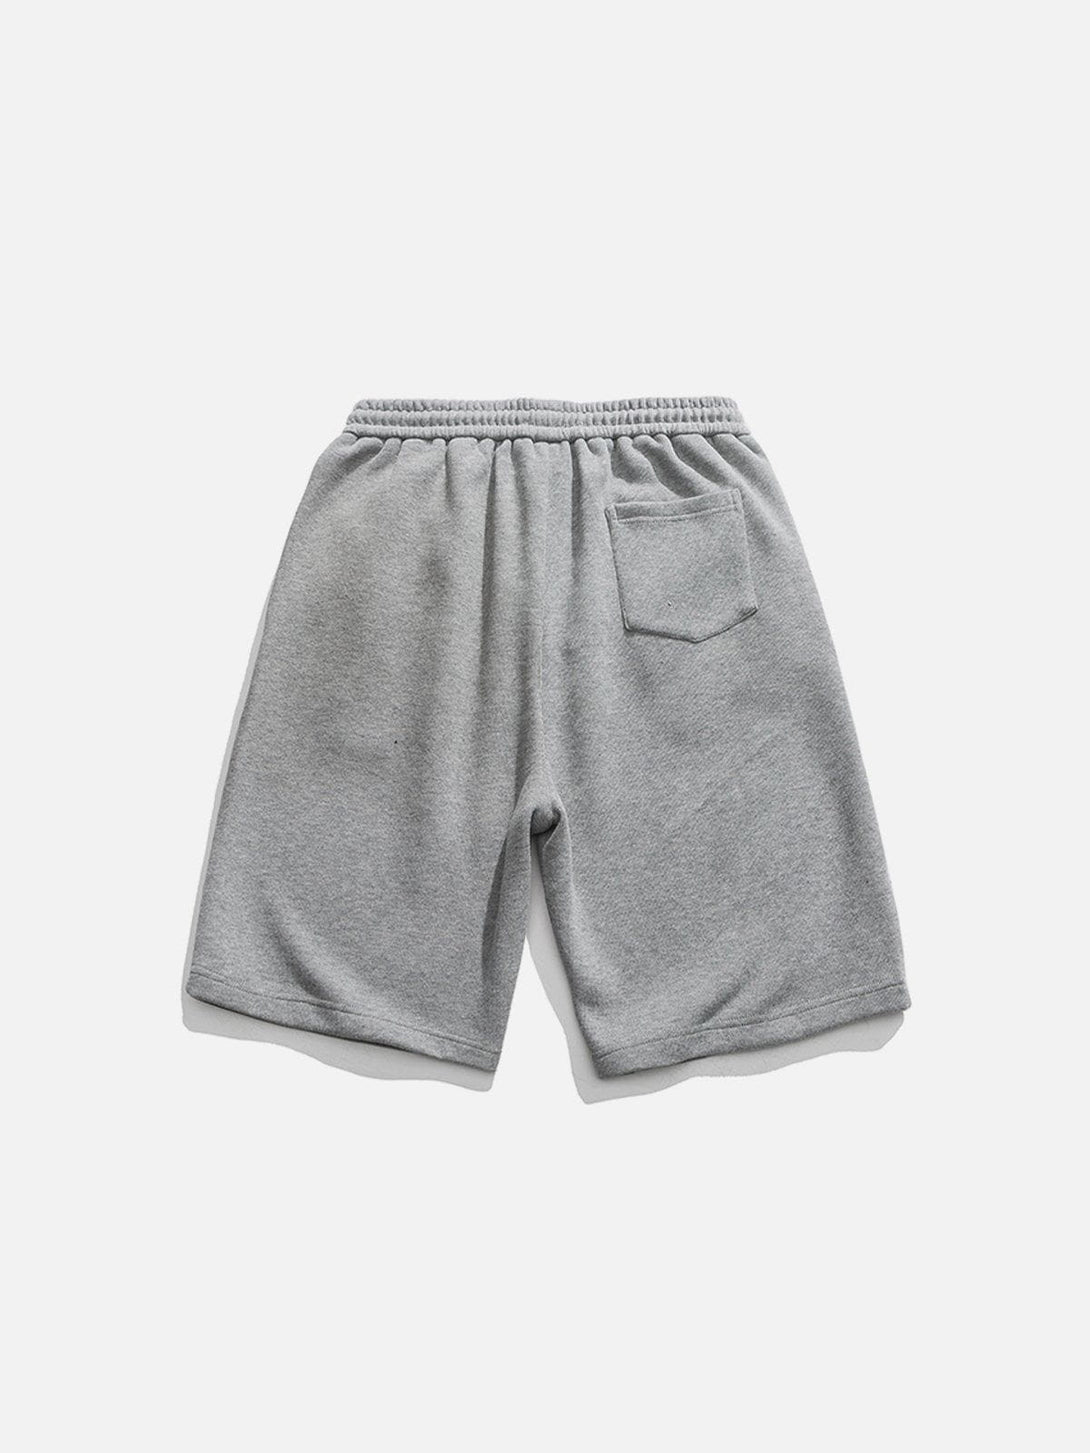 Levefly - Solid Coloured Drawstring Shorts - Streetwear Fashion - levefly.com